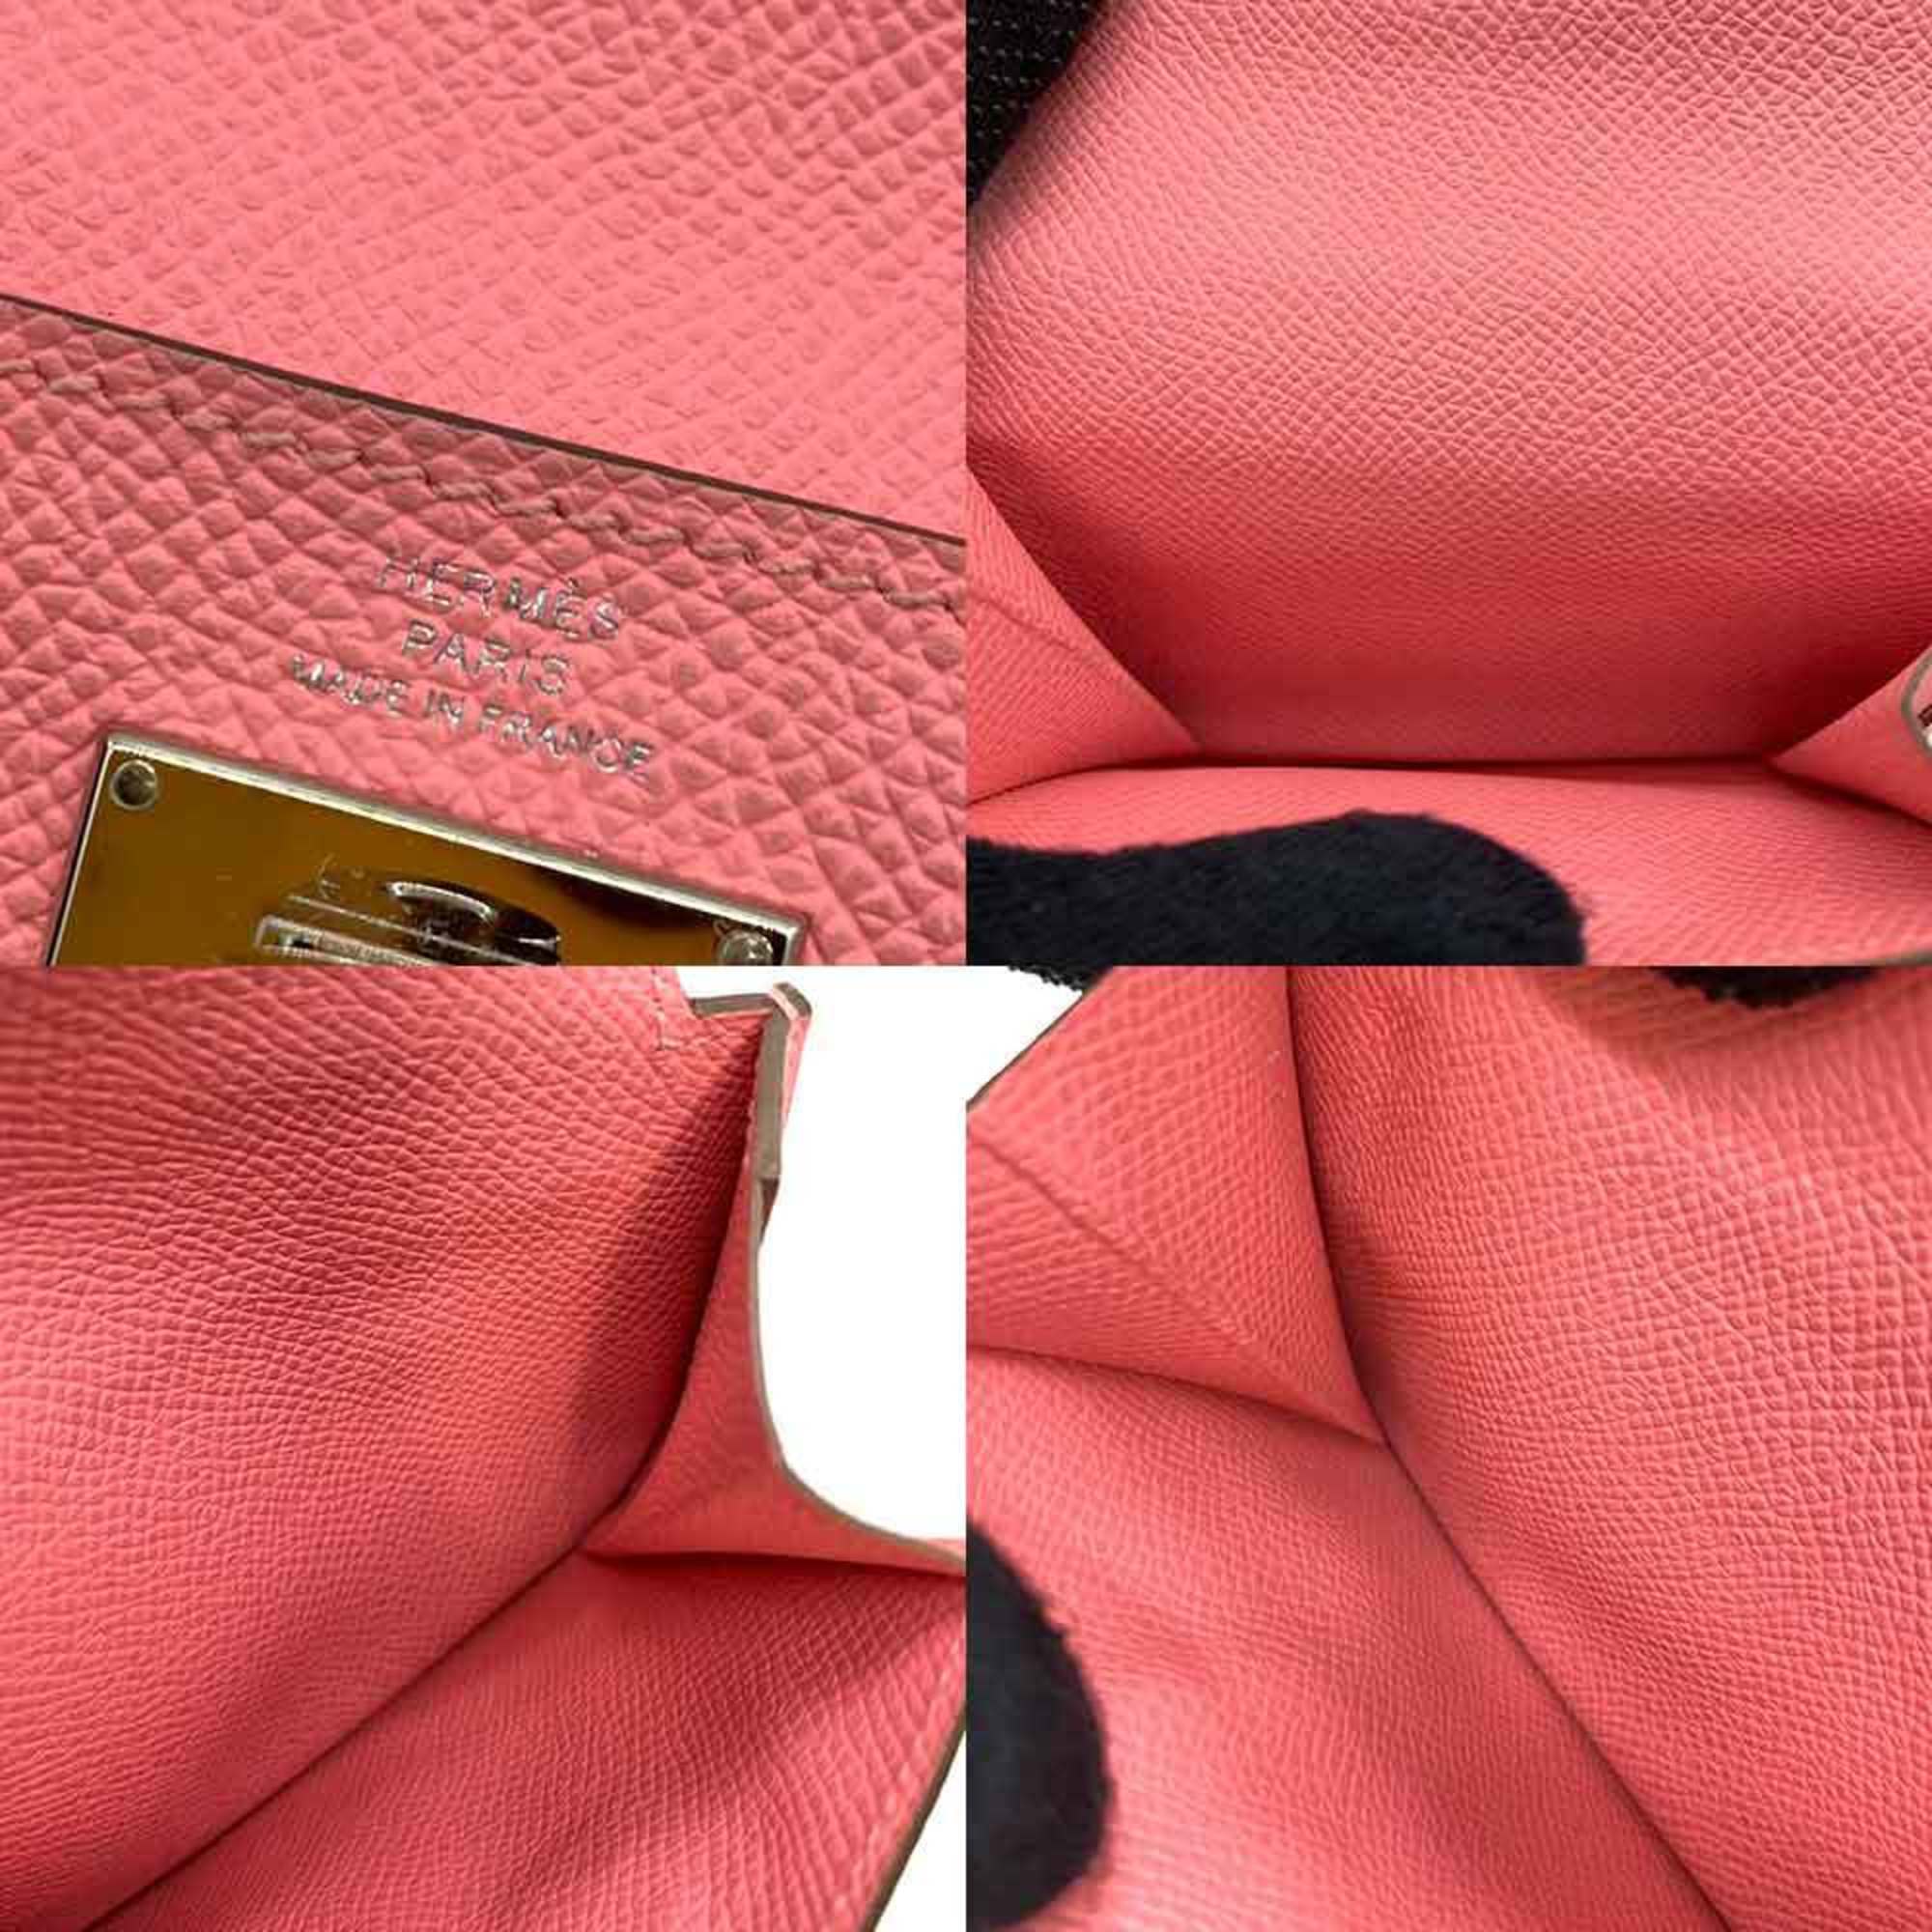 Hermes Wallet Kelly Pocket Compact Pink Wallet/Coin Case Coin Purse Women's Epsom Leather HERMES